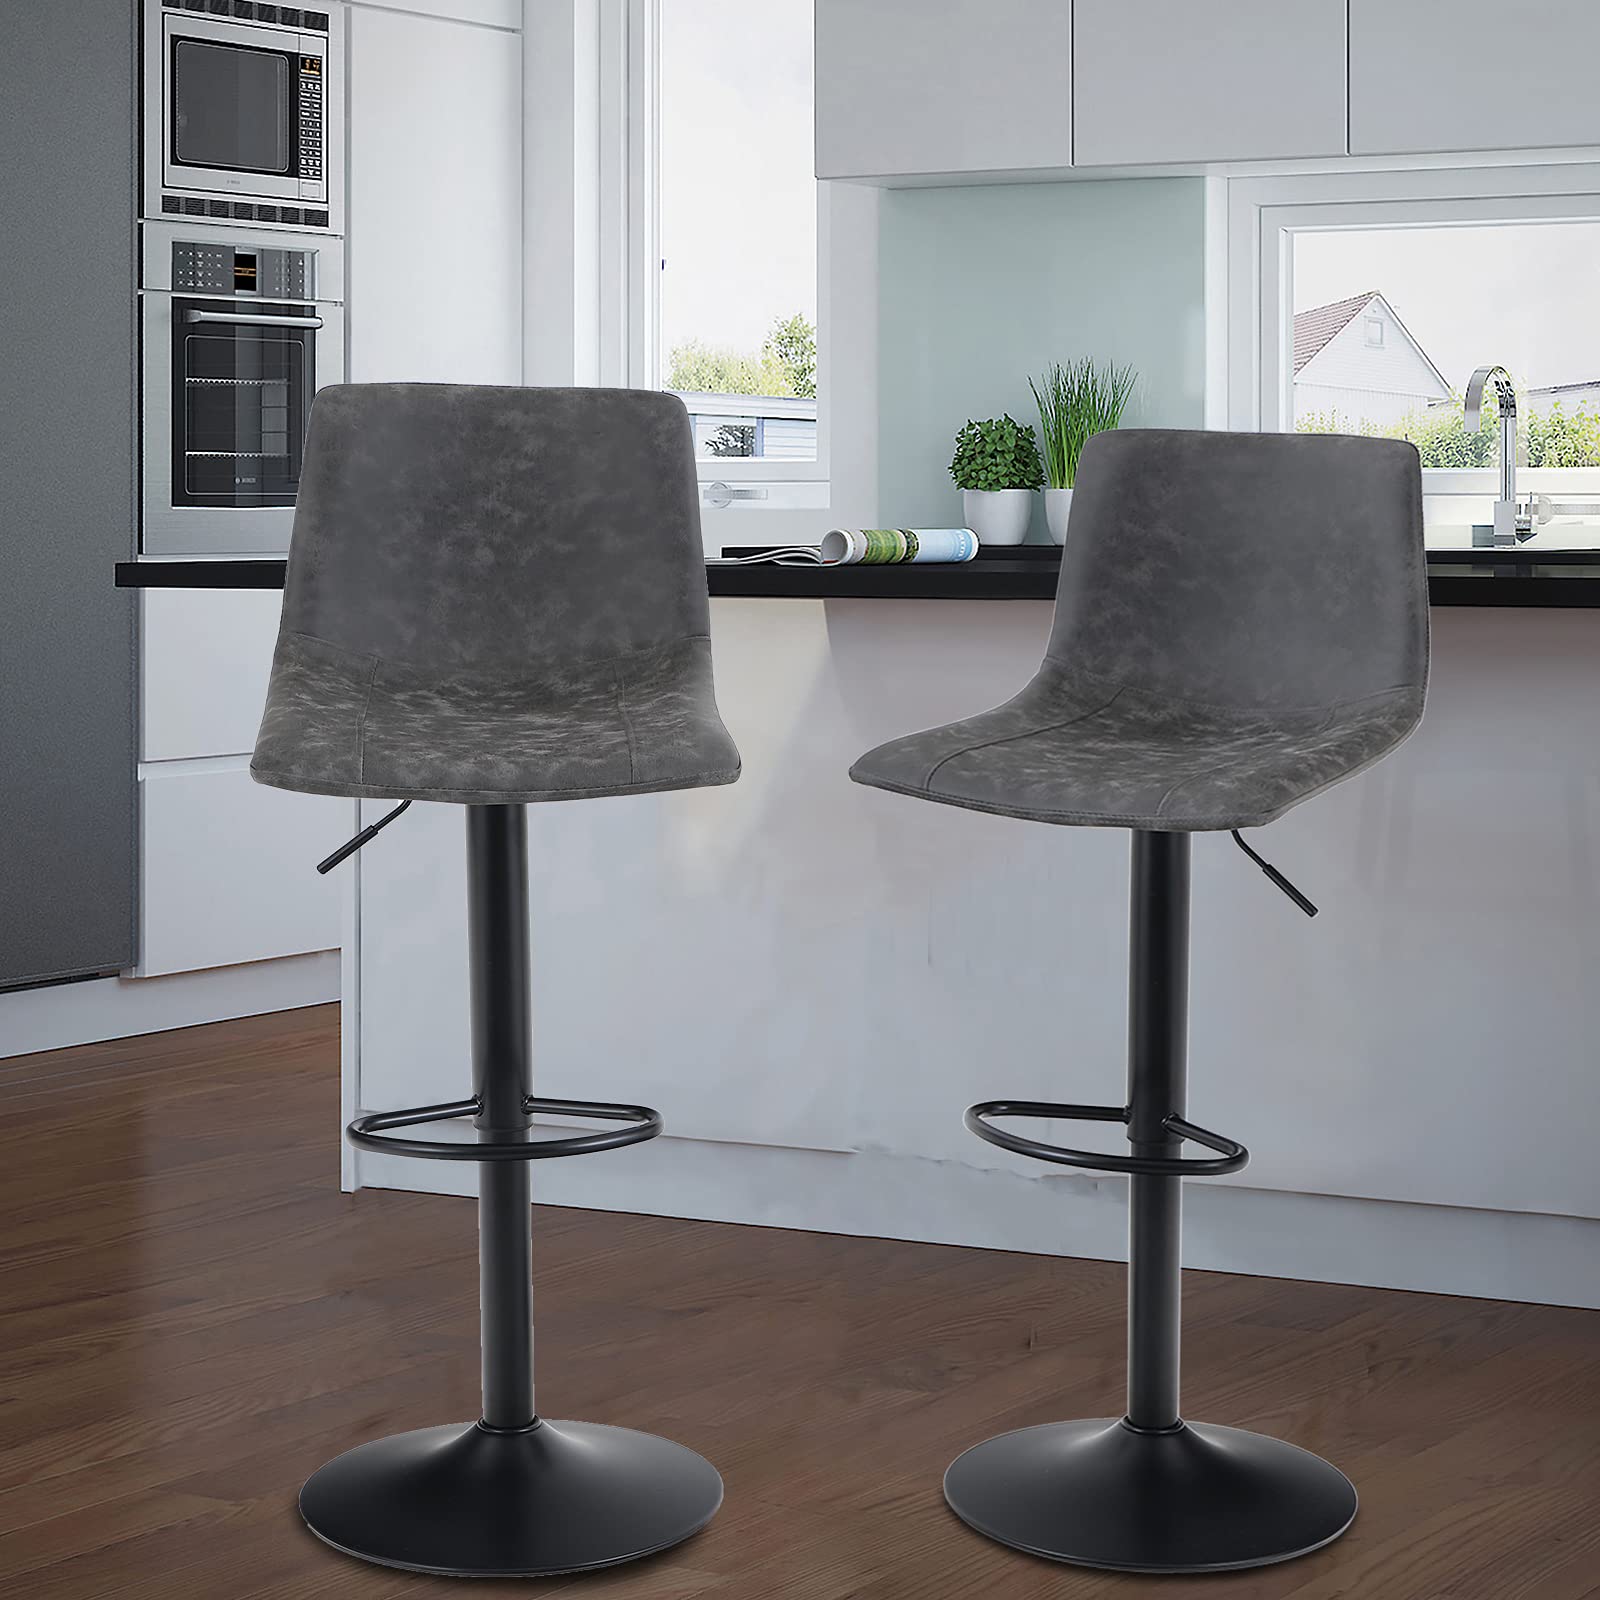 maison maison Maison Swivel Bar Stools Set of 2 for Kitchen counter Adjustable counter Height Bar chairs with Back Tall Barstools Faux Leather